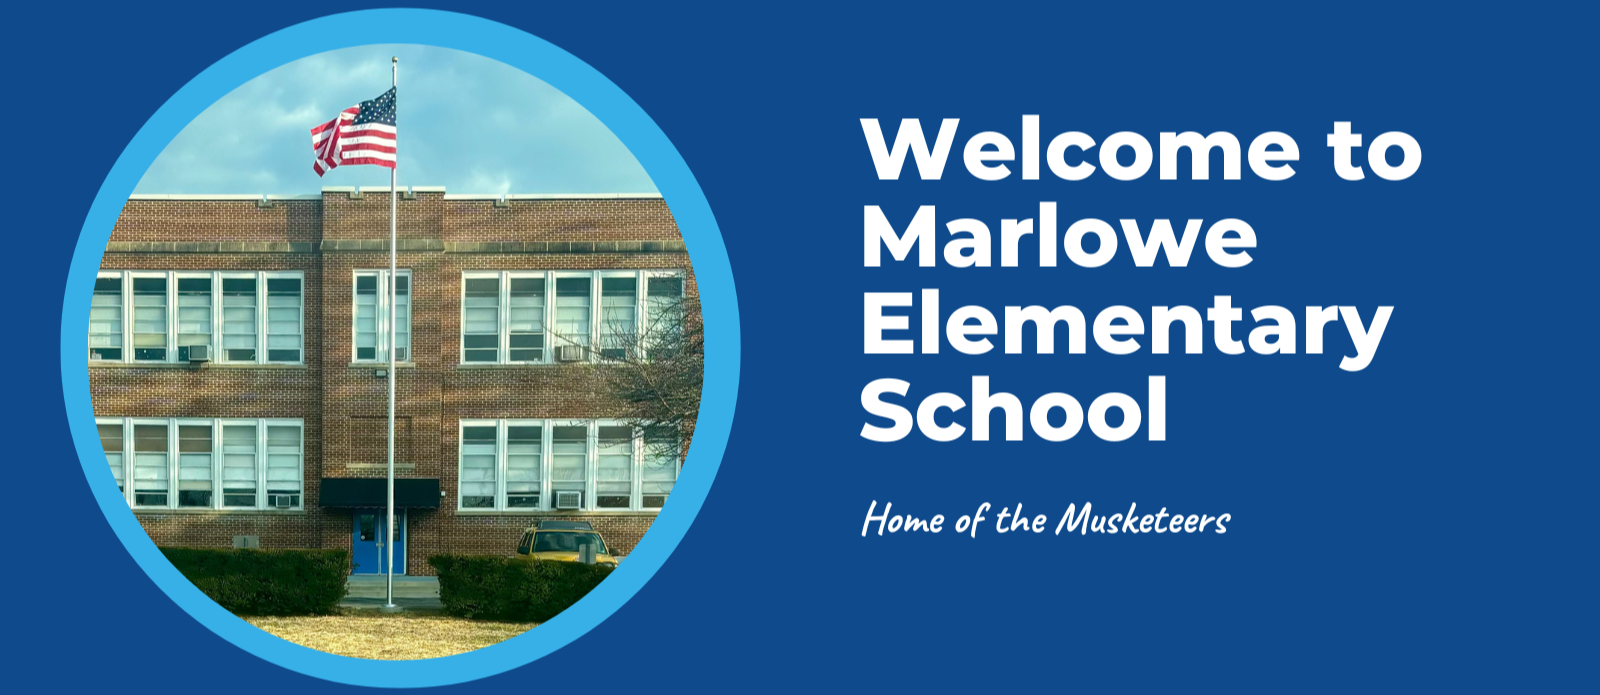 image of banner that says welcome to marlowe elementary school and home of the pioneers